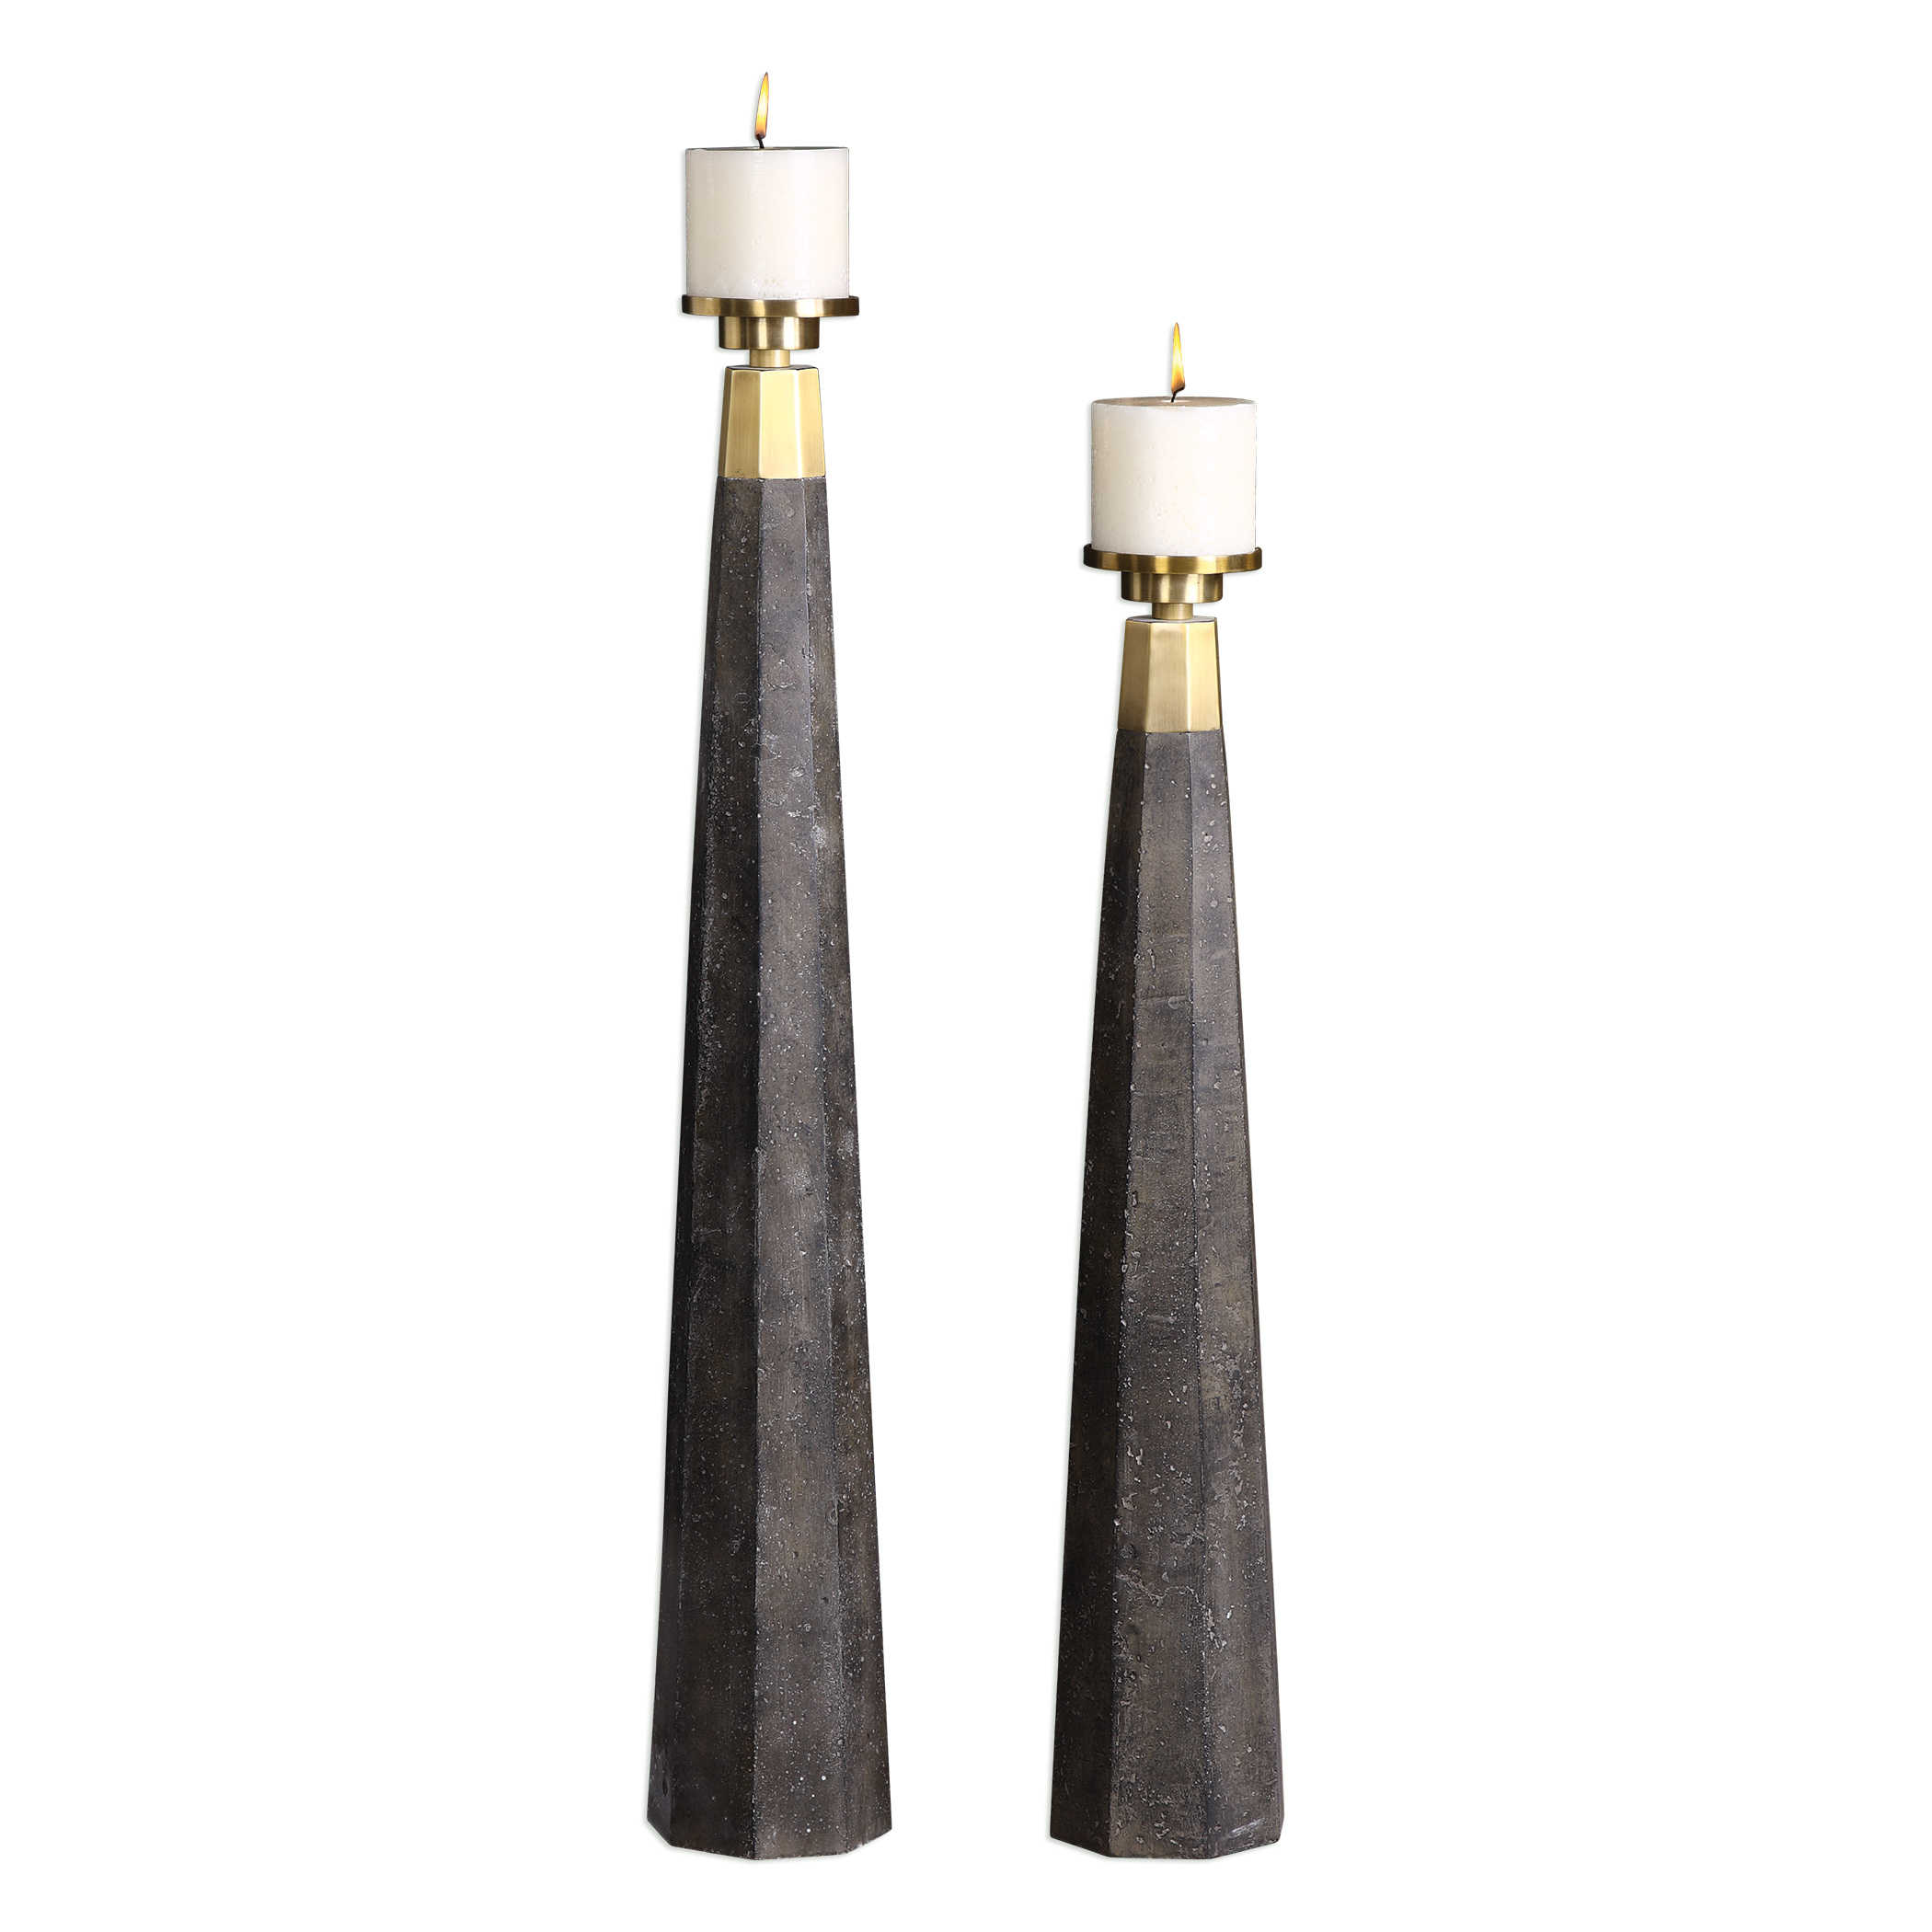 Uttermost Home Accents Leslie Brushed Brass Candleholders, S/2